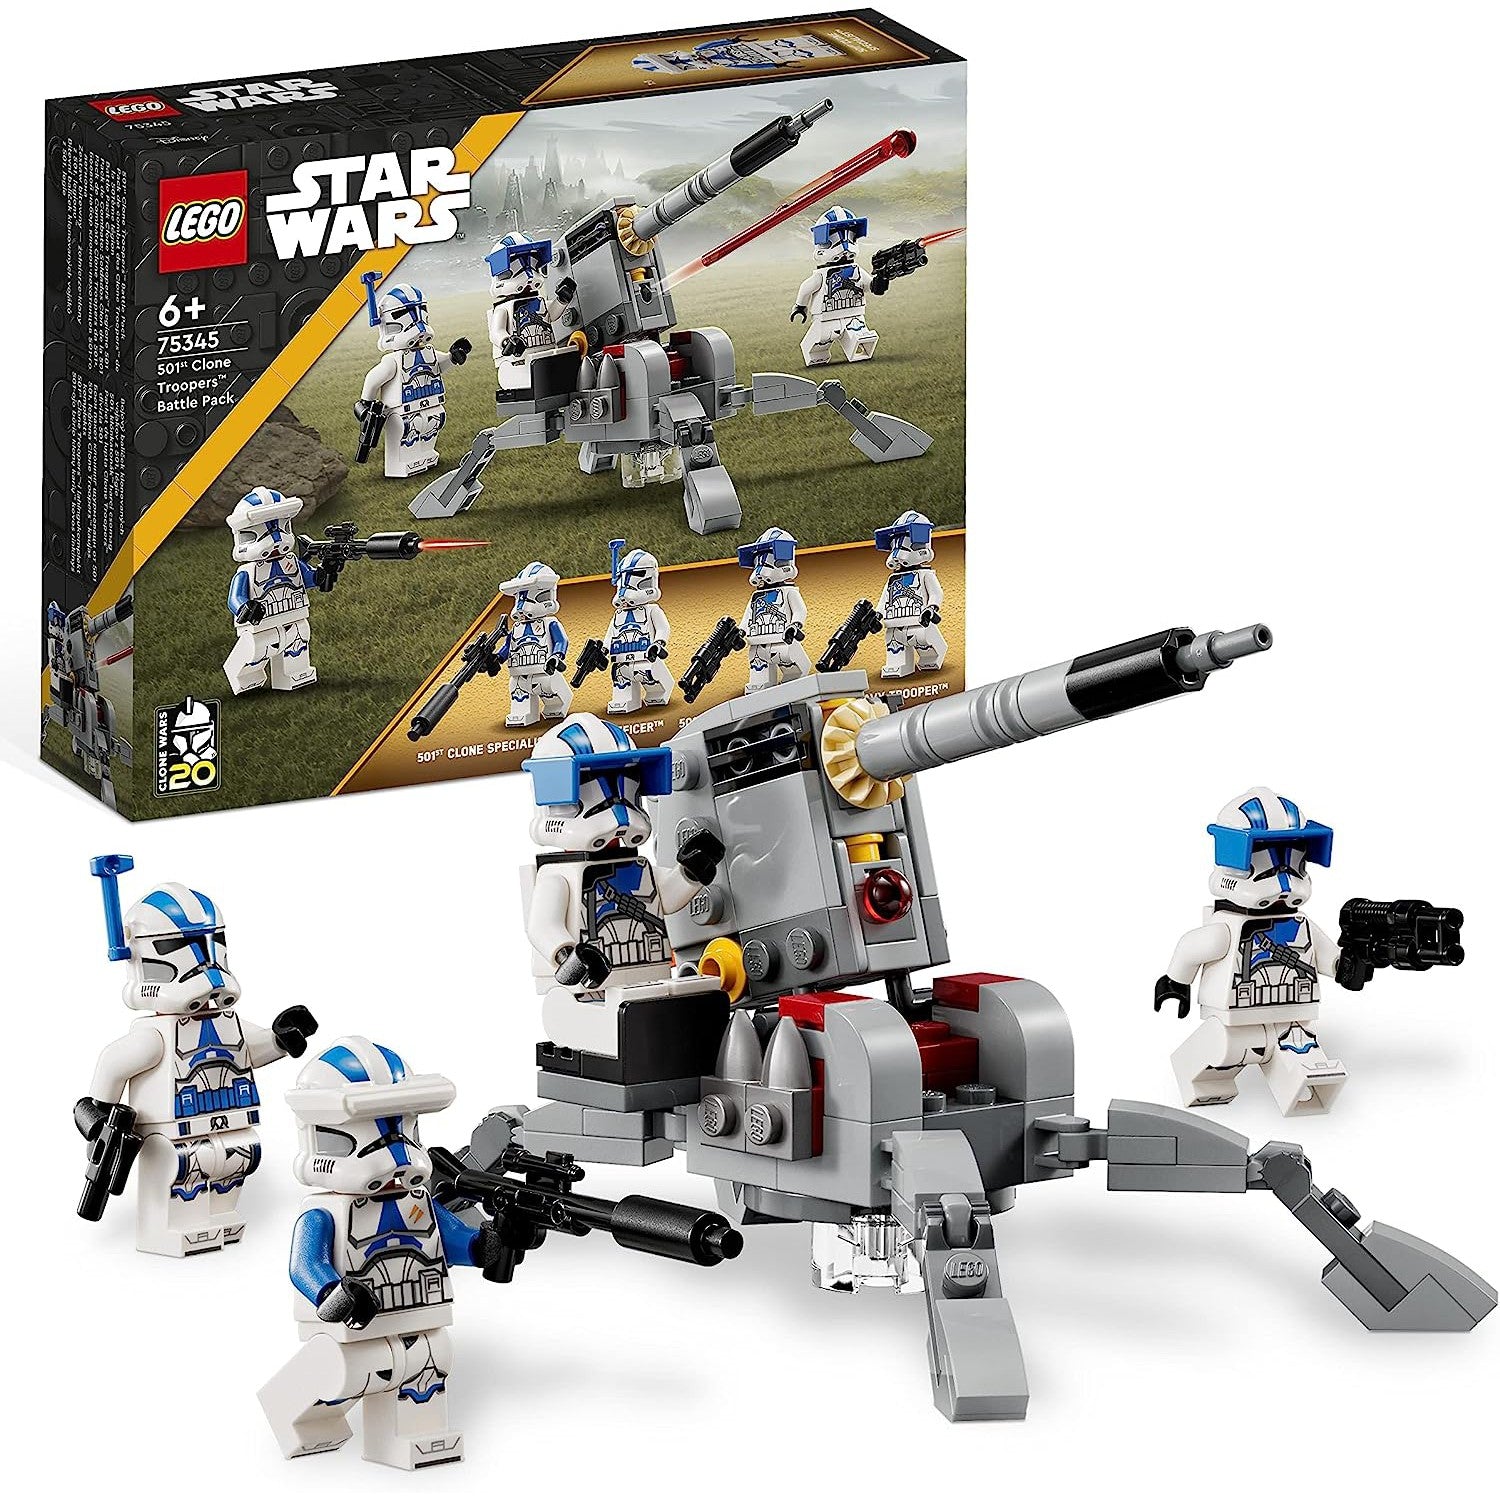 LEGO 75345 Star Wars 501st Clone Troopers Battle Pack - New